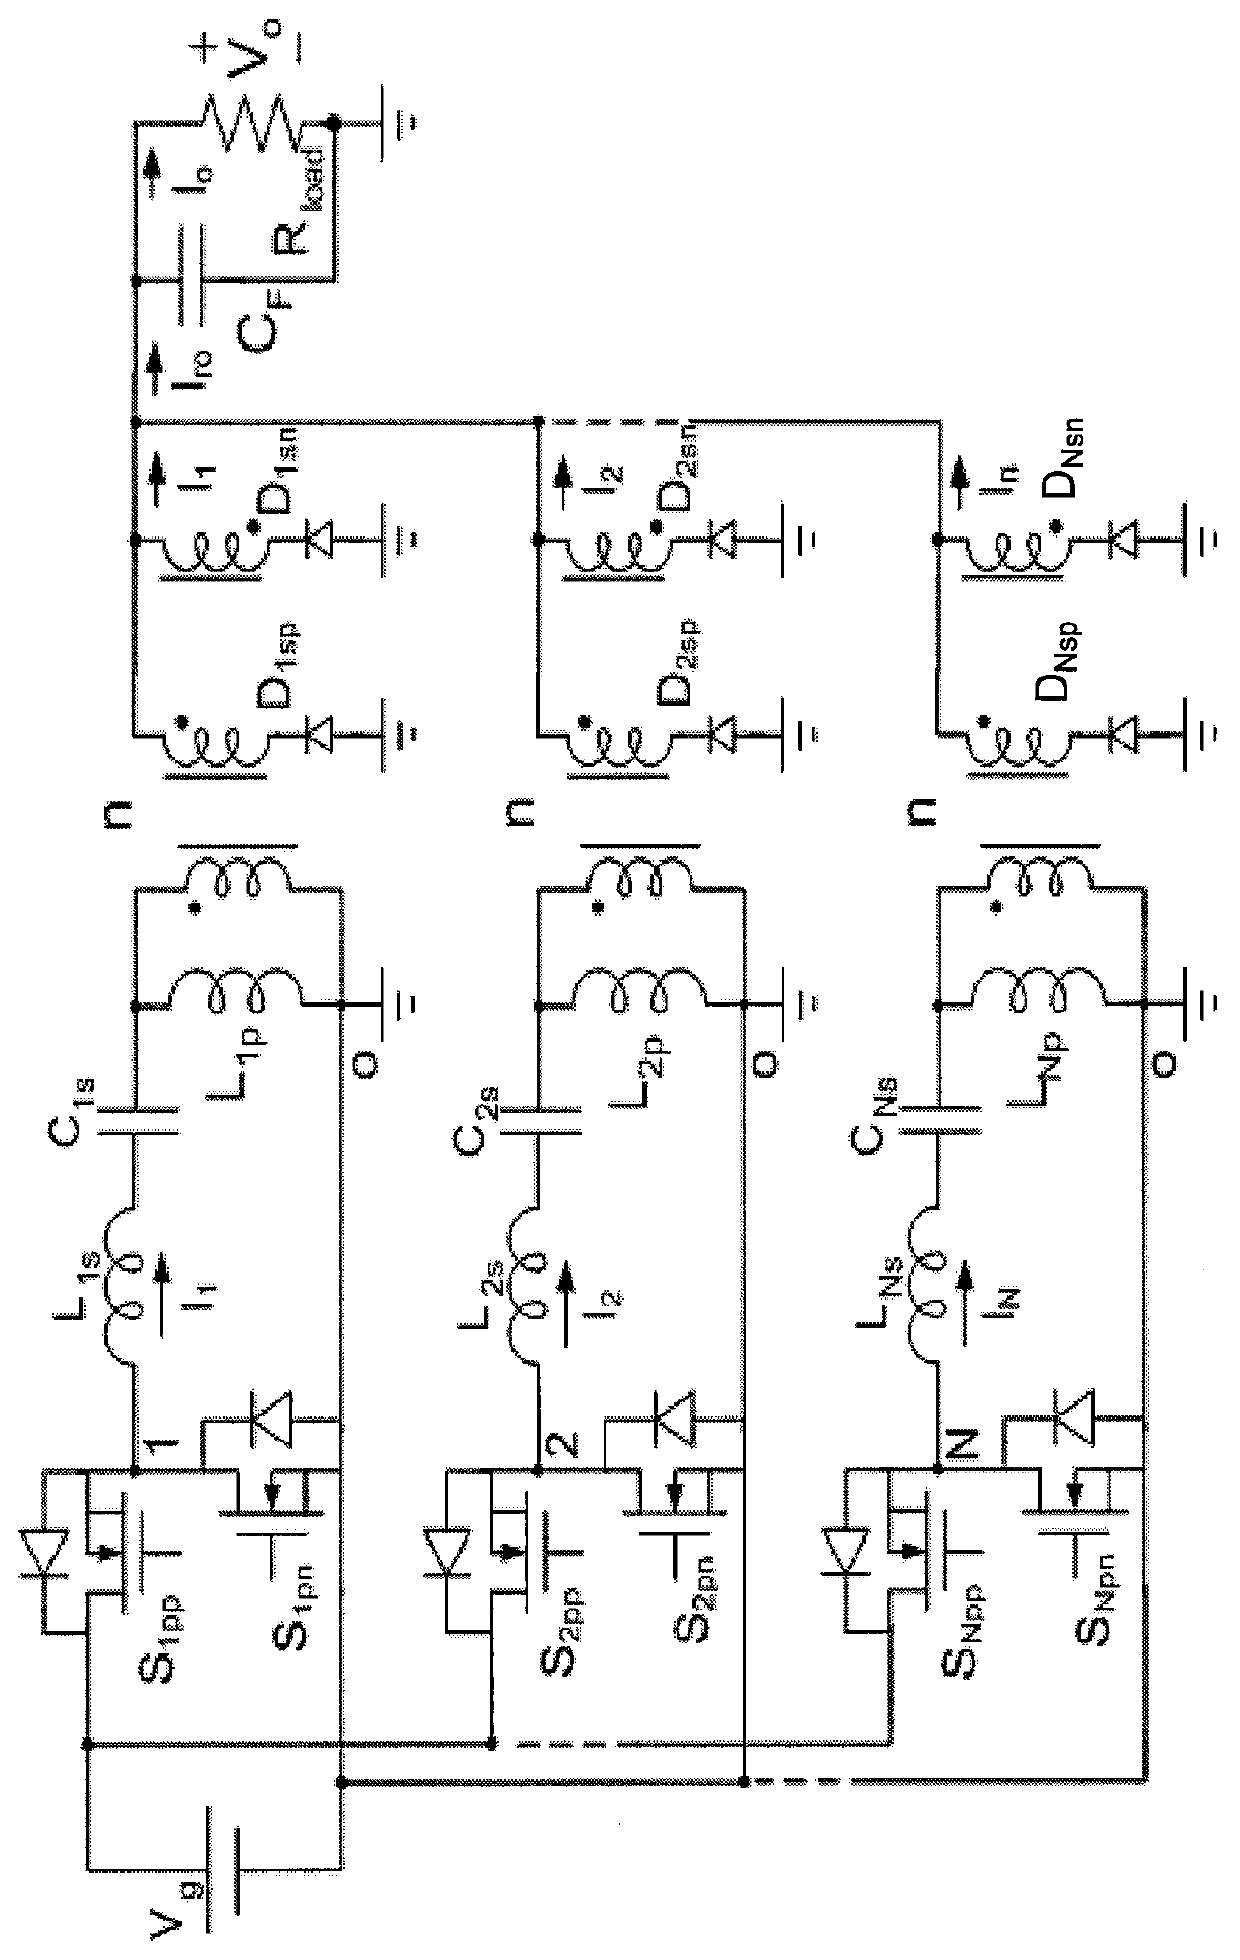 Multiphase resonant converter for DC-DC applications